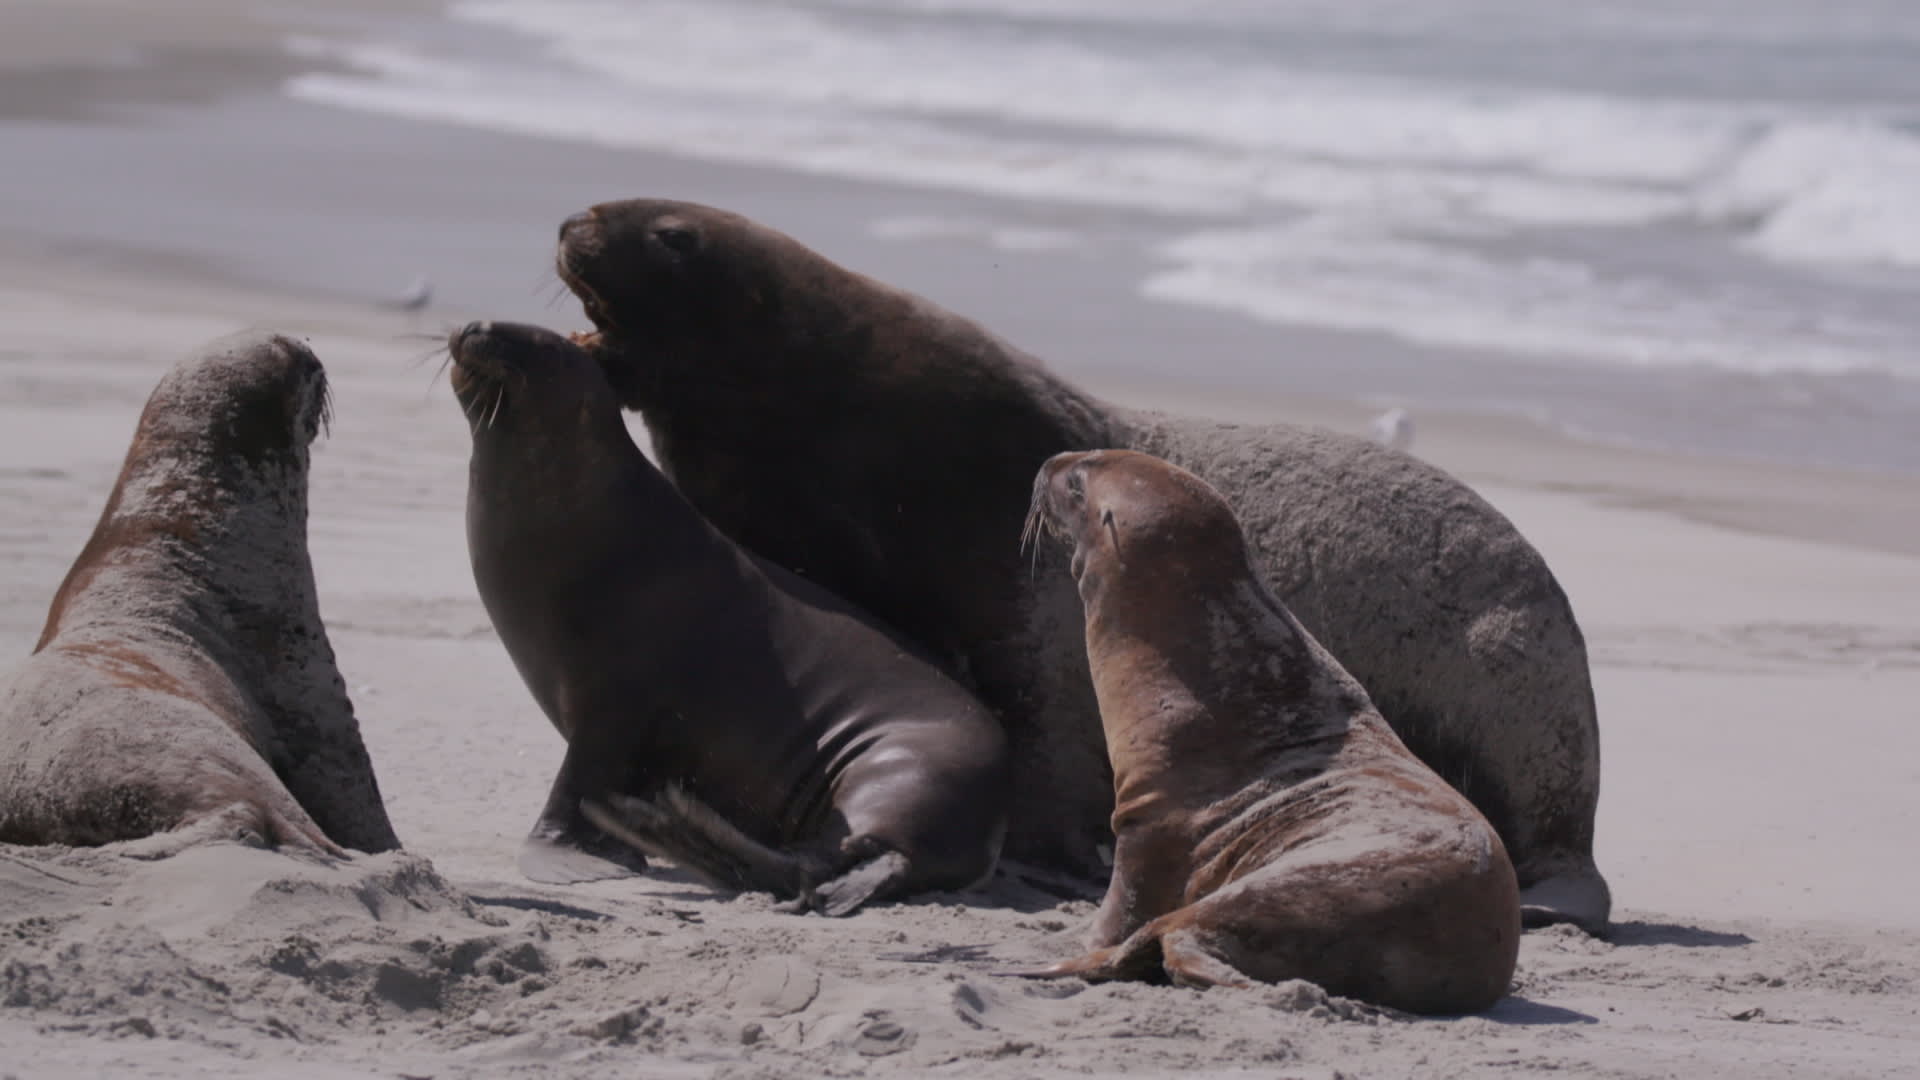 In New Zealand, endangered sea lions have